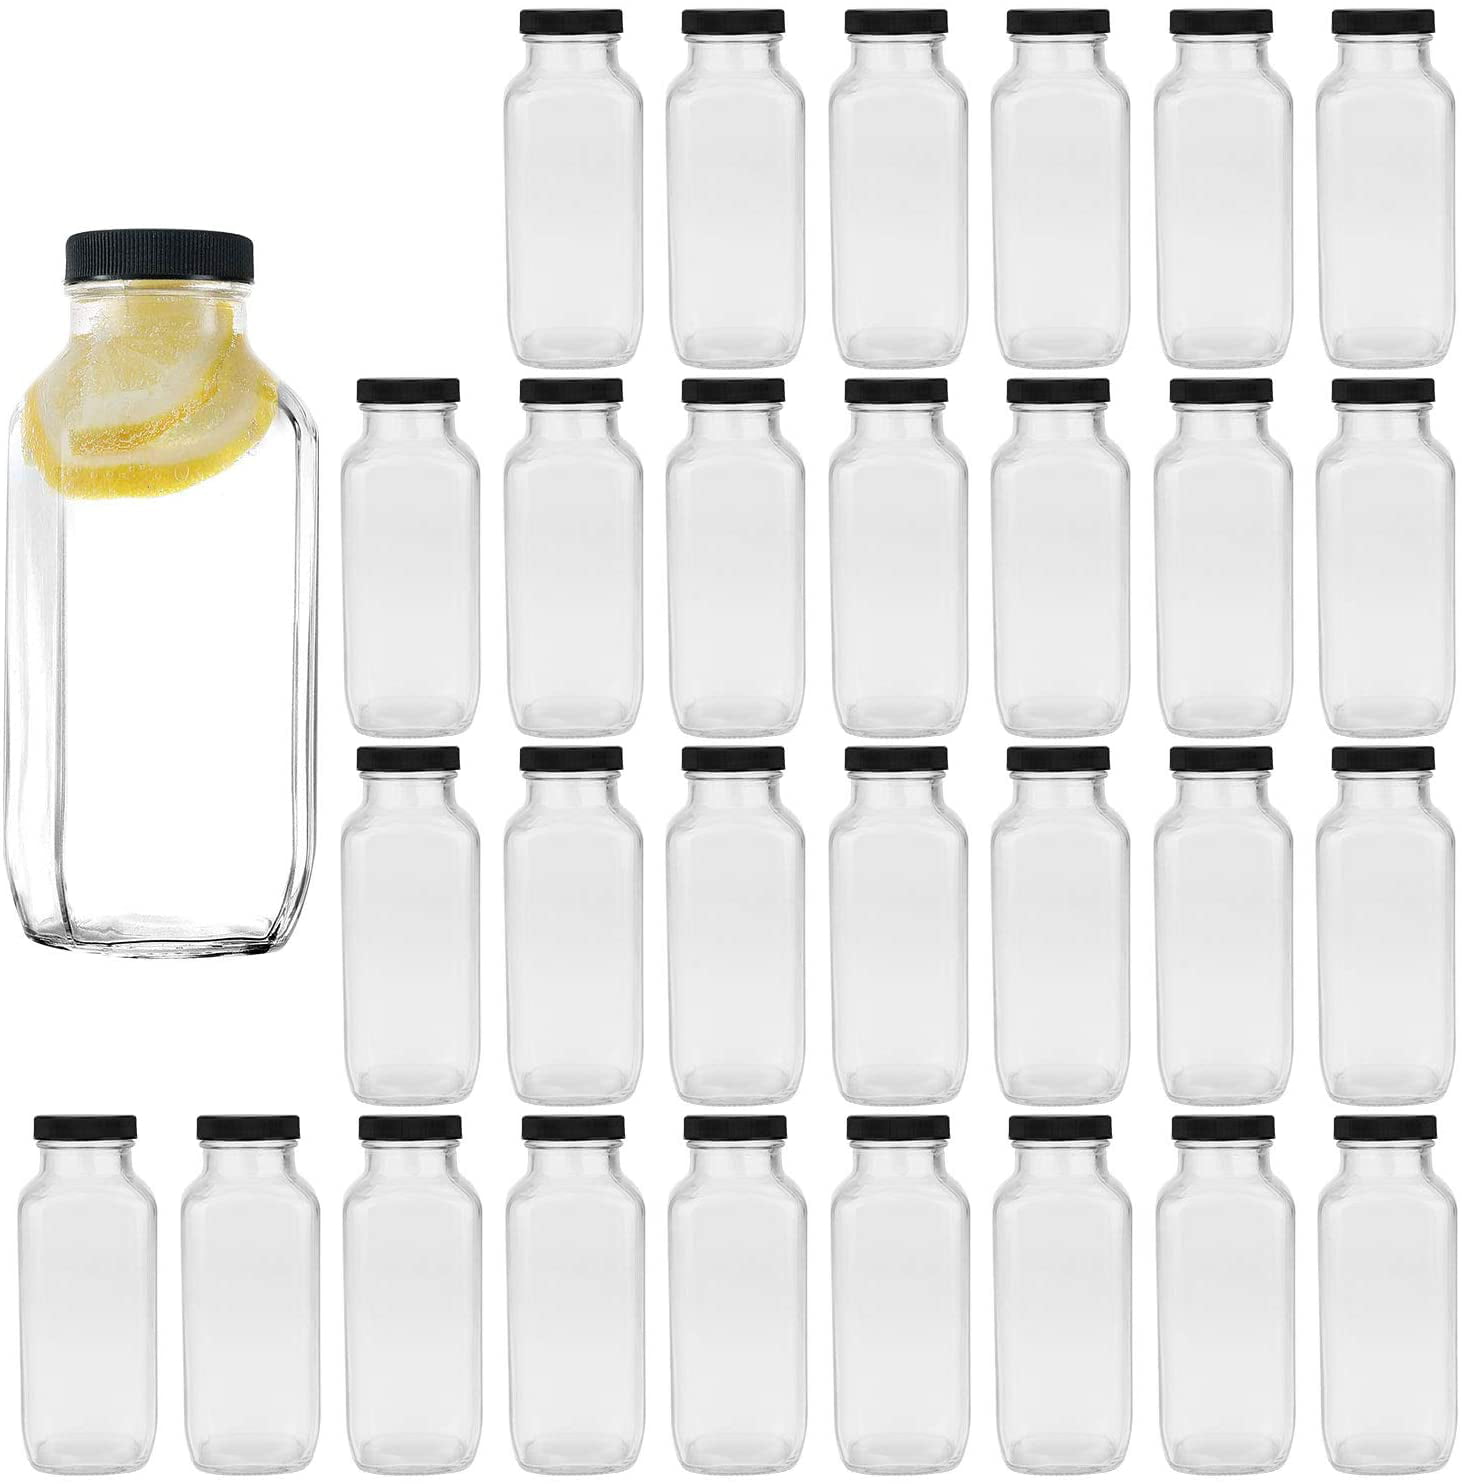 Labels and Sponge Brush Included Milk Kombucha and More Great for storing Juices HINGWAH 16 OZ Glass Drink Bottles Set of 12 Vintage Glass Water Bottles with Lids Beverages